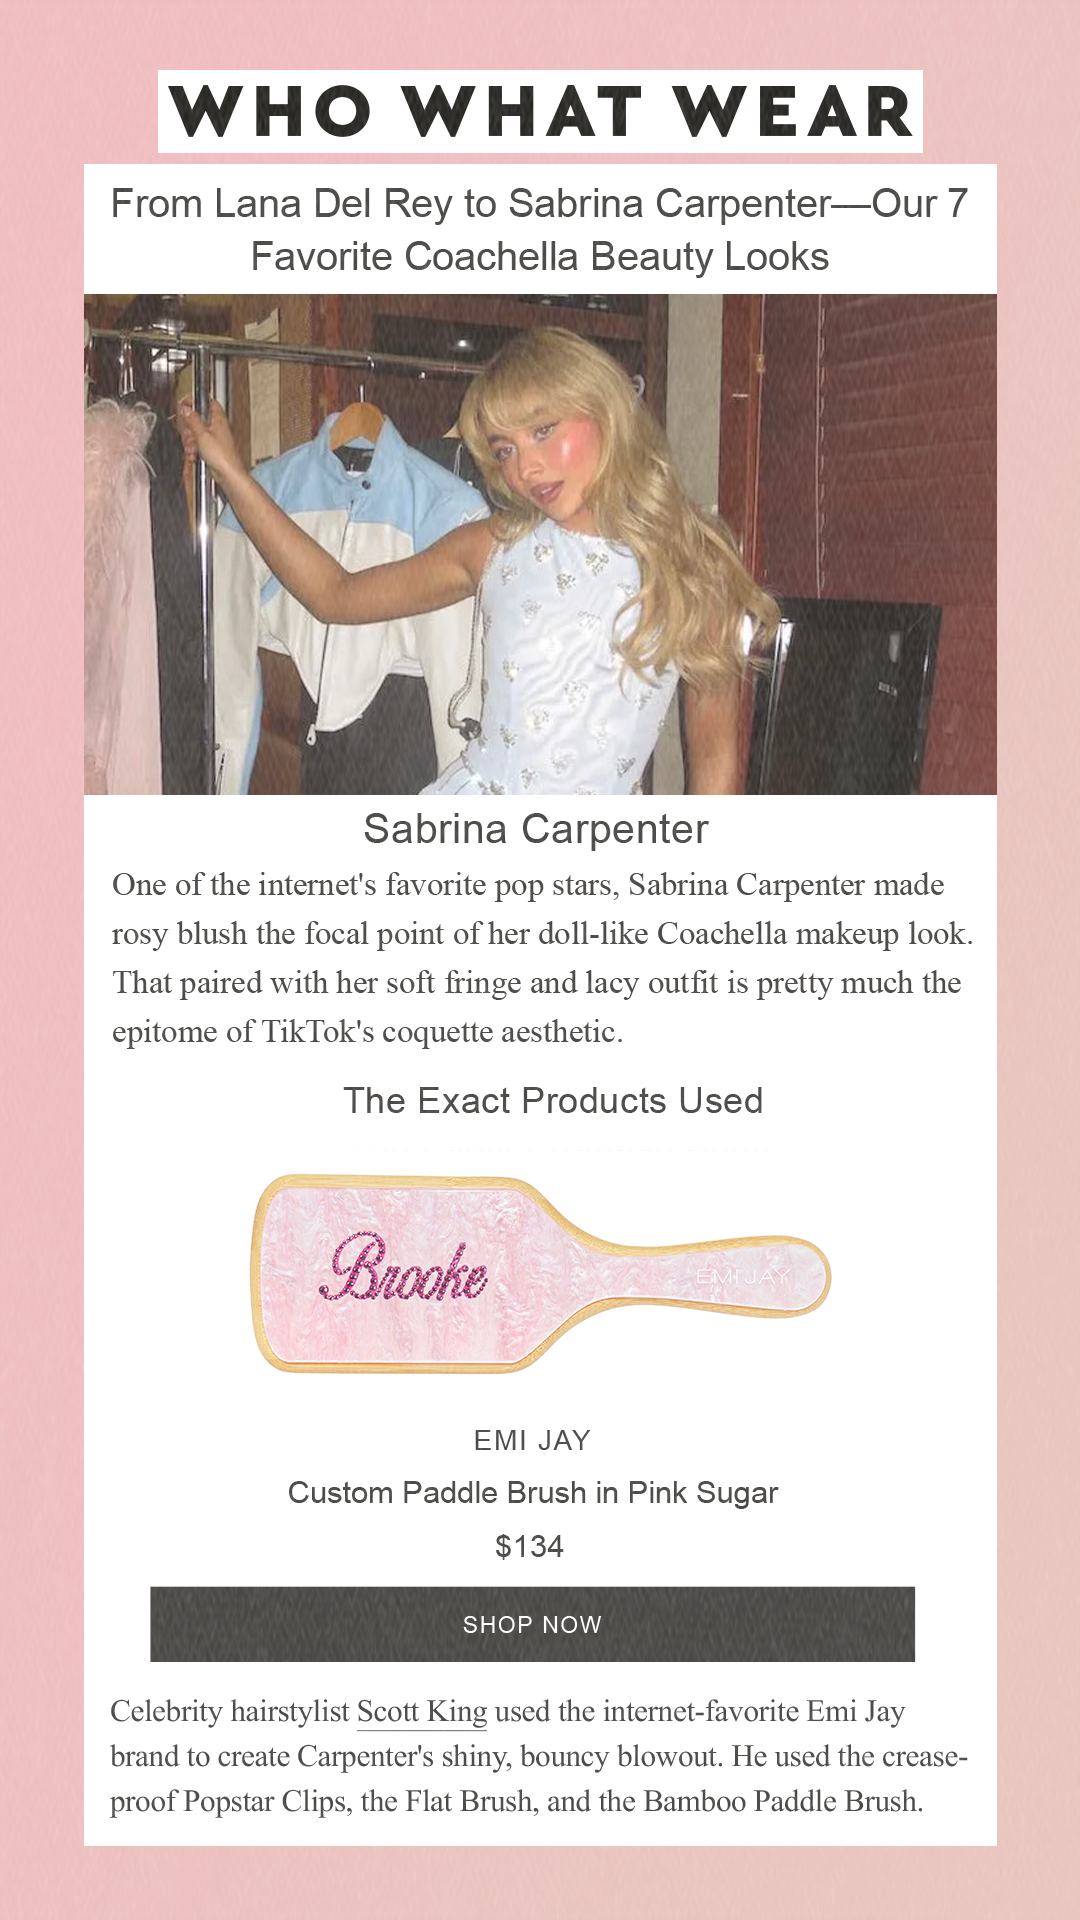 From Lana Del Rey to Sabrina Carpenter—Our 7 Favorite Coachella Beauty Looks Sabrina Carpenter One of the internet's favorite pop stars, Sabrina Carpenter made rosy blush the focal point of her doll-like Coachella makeup look. That paired with her soft fringe and lacy outfit is pretty much the epitome of TikTok's coquette aesthetic. Emi Jay Custom Paddle Brush in Pink Sugar $134 SHOP NOW Celebrity hairstylist Scott King used the internet-favorite Emi Jay brand to create Carpenter's shiny, bouncy blowout. He used the crease-proof Popstar Clips, the Flat Brush, and the Bamboo Paddle Brush.